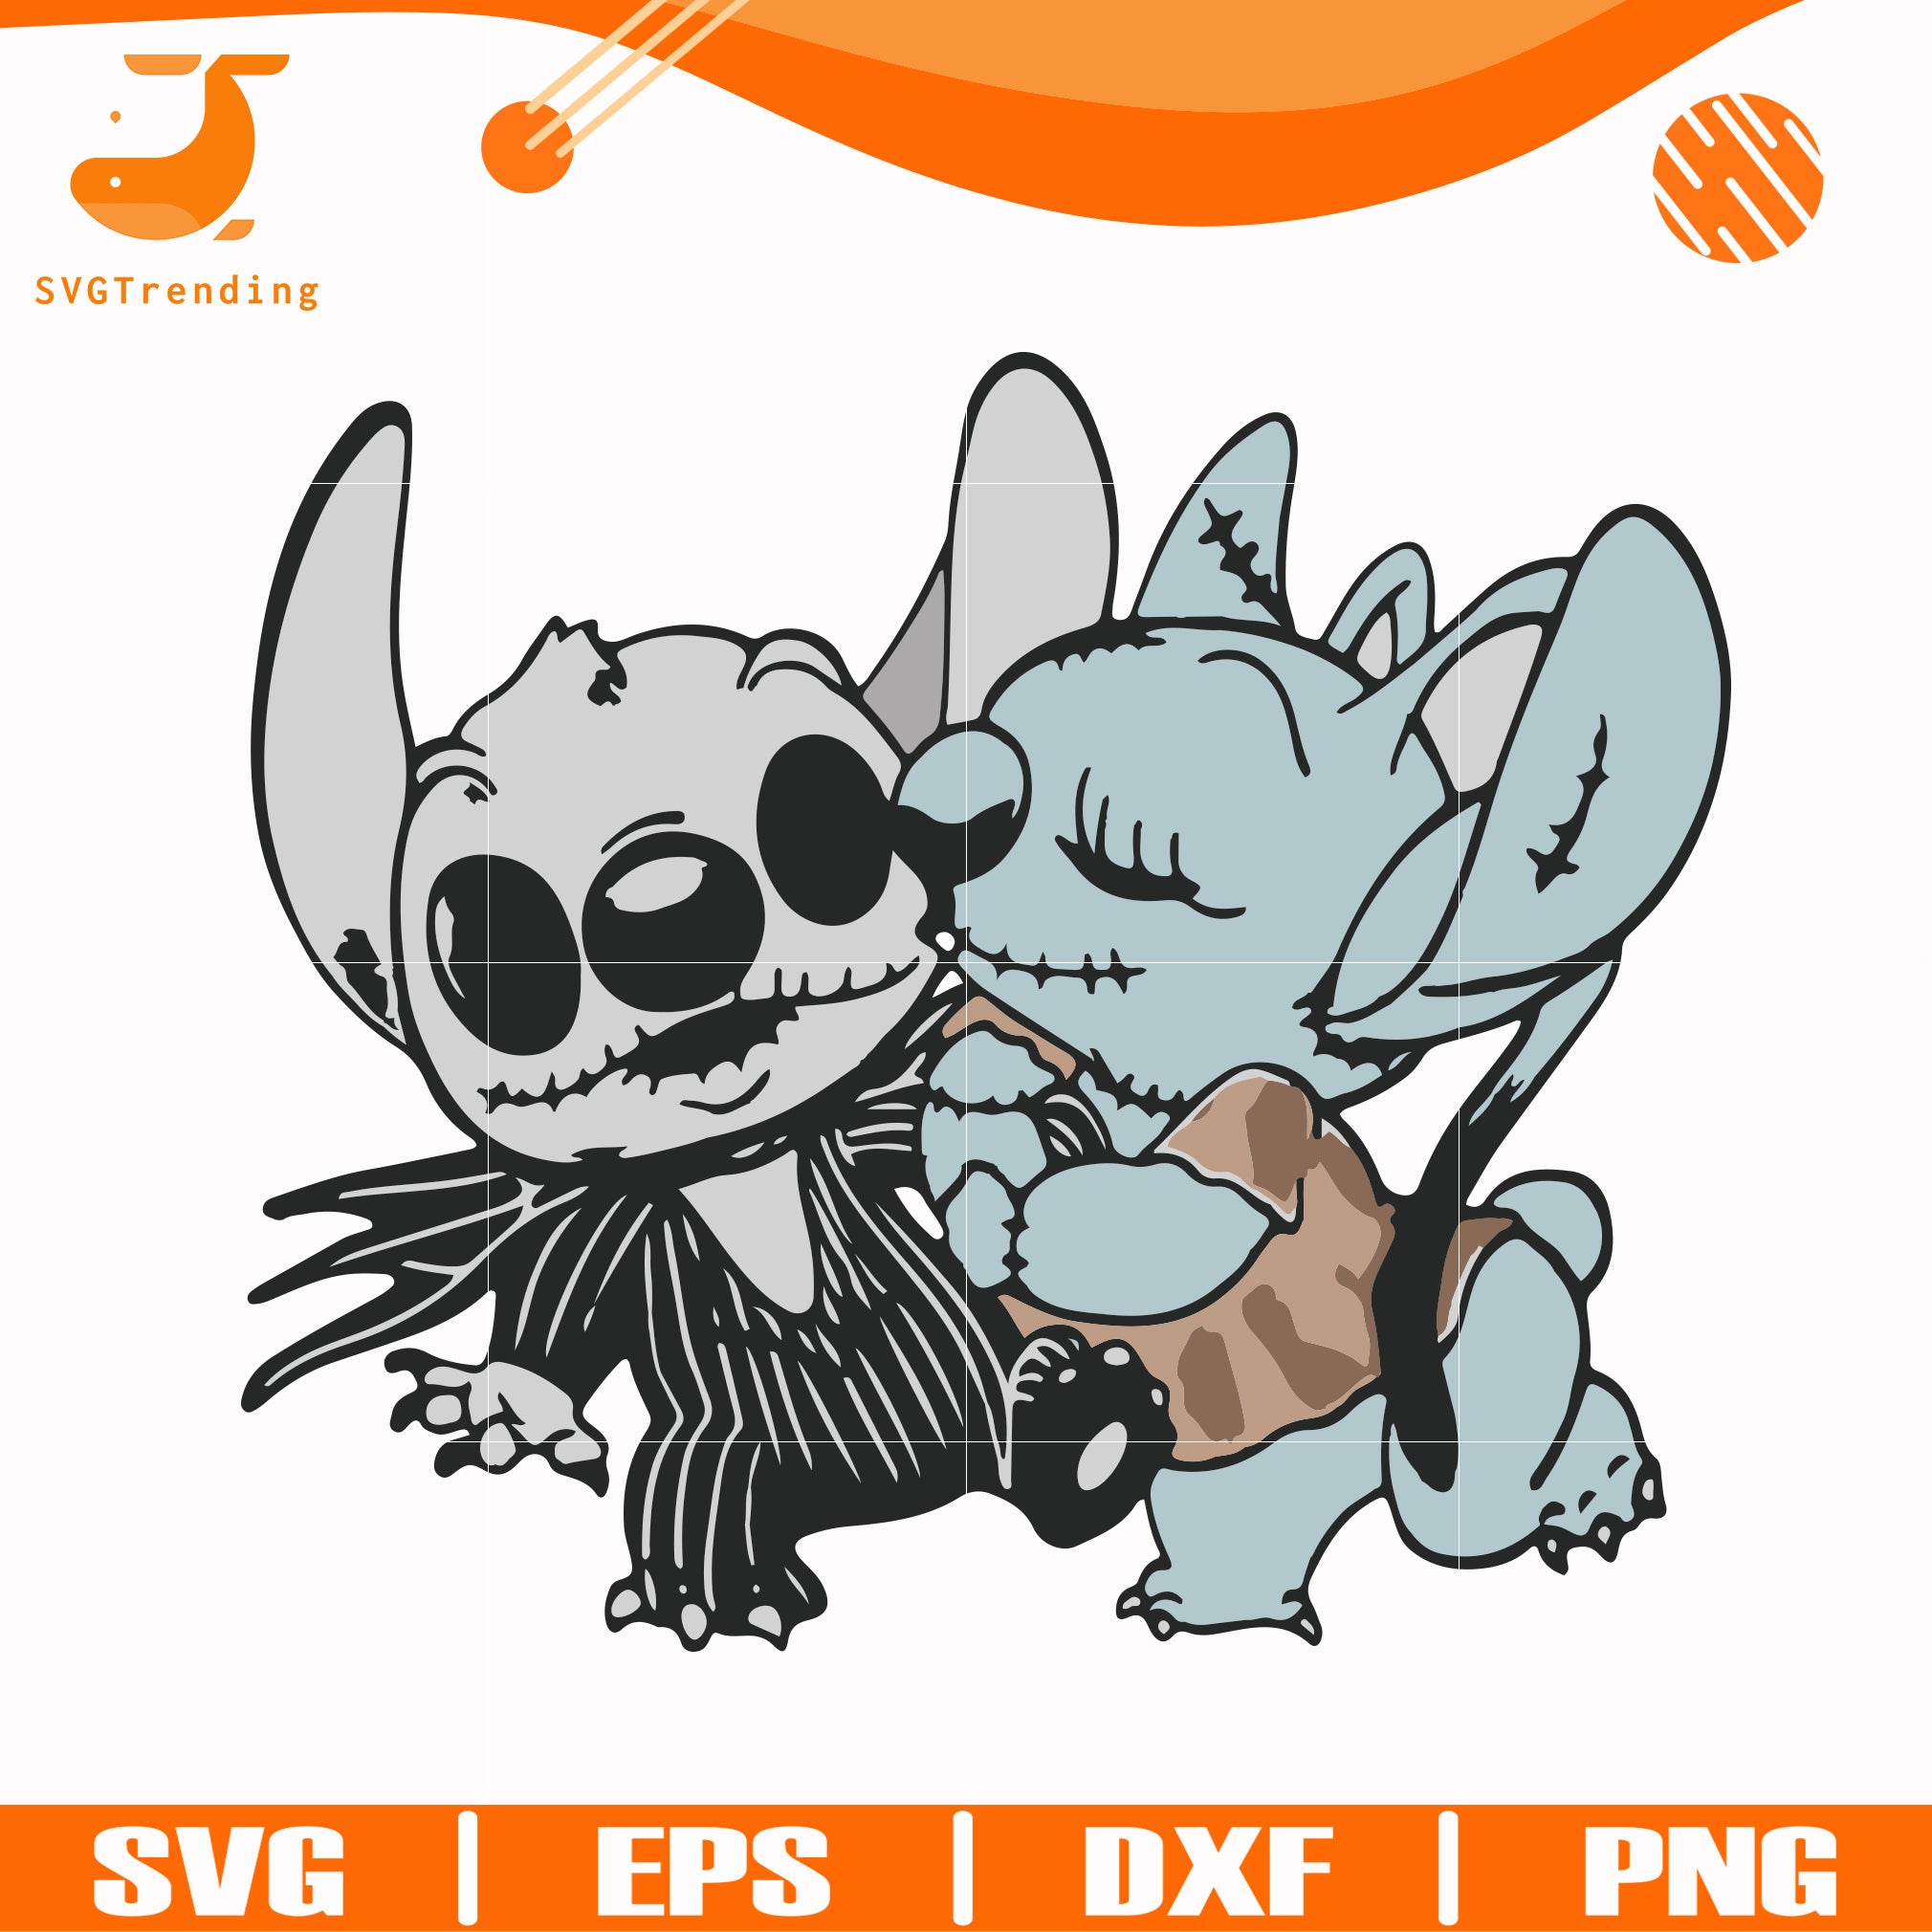 Download Stitch And Angel Jack Skellington The Nightmare Before Christmas Svg Svgtrending